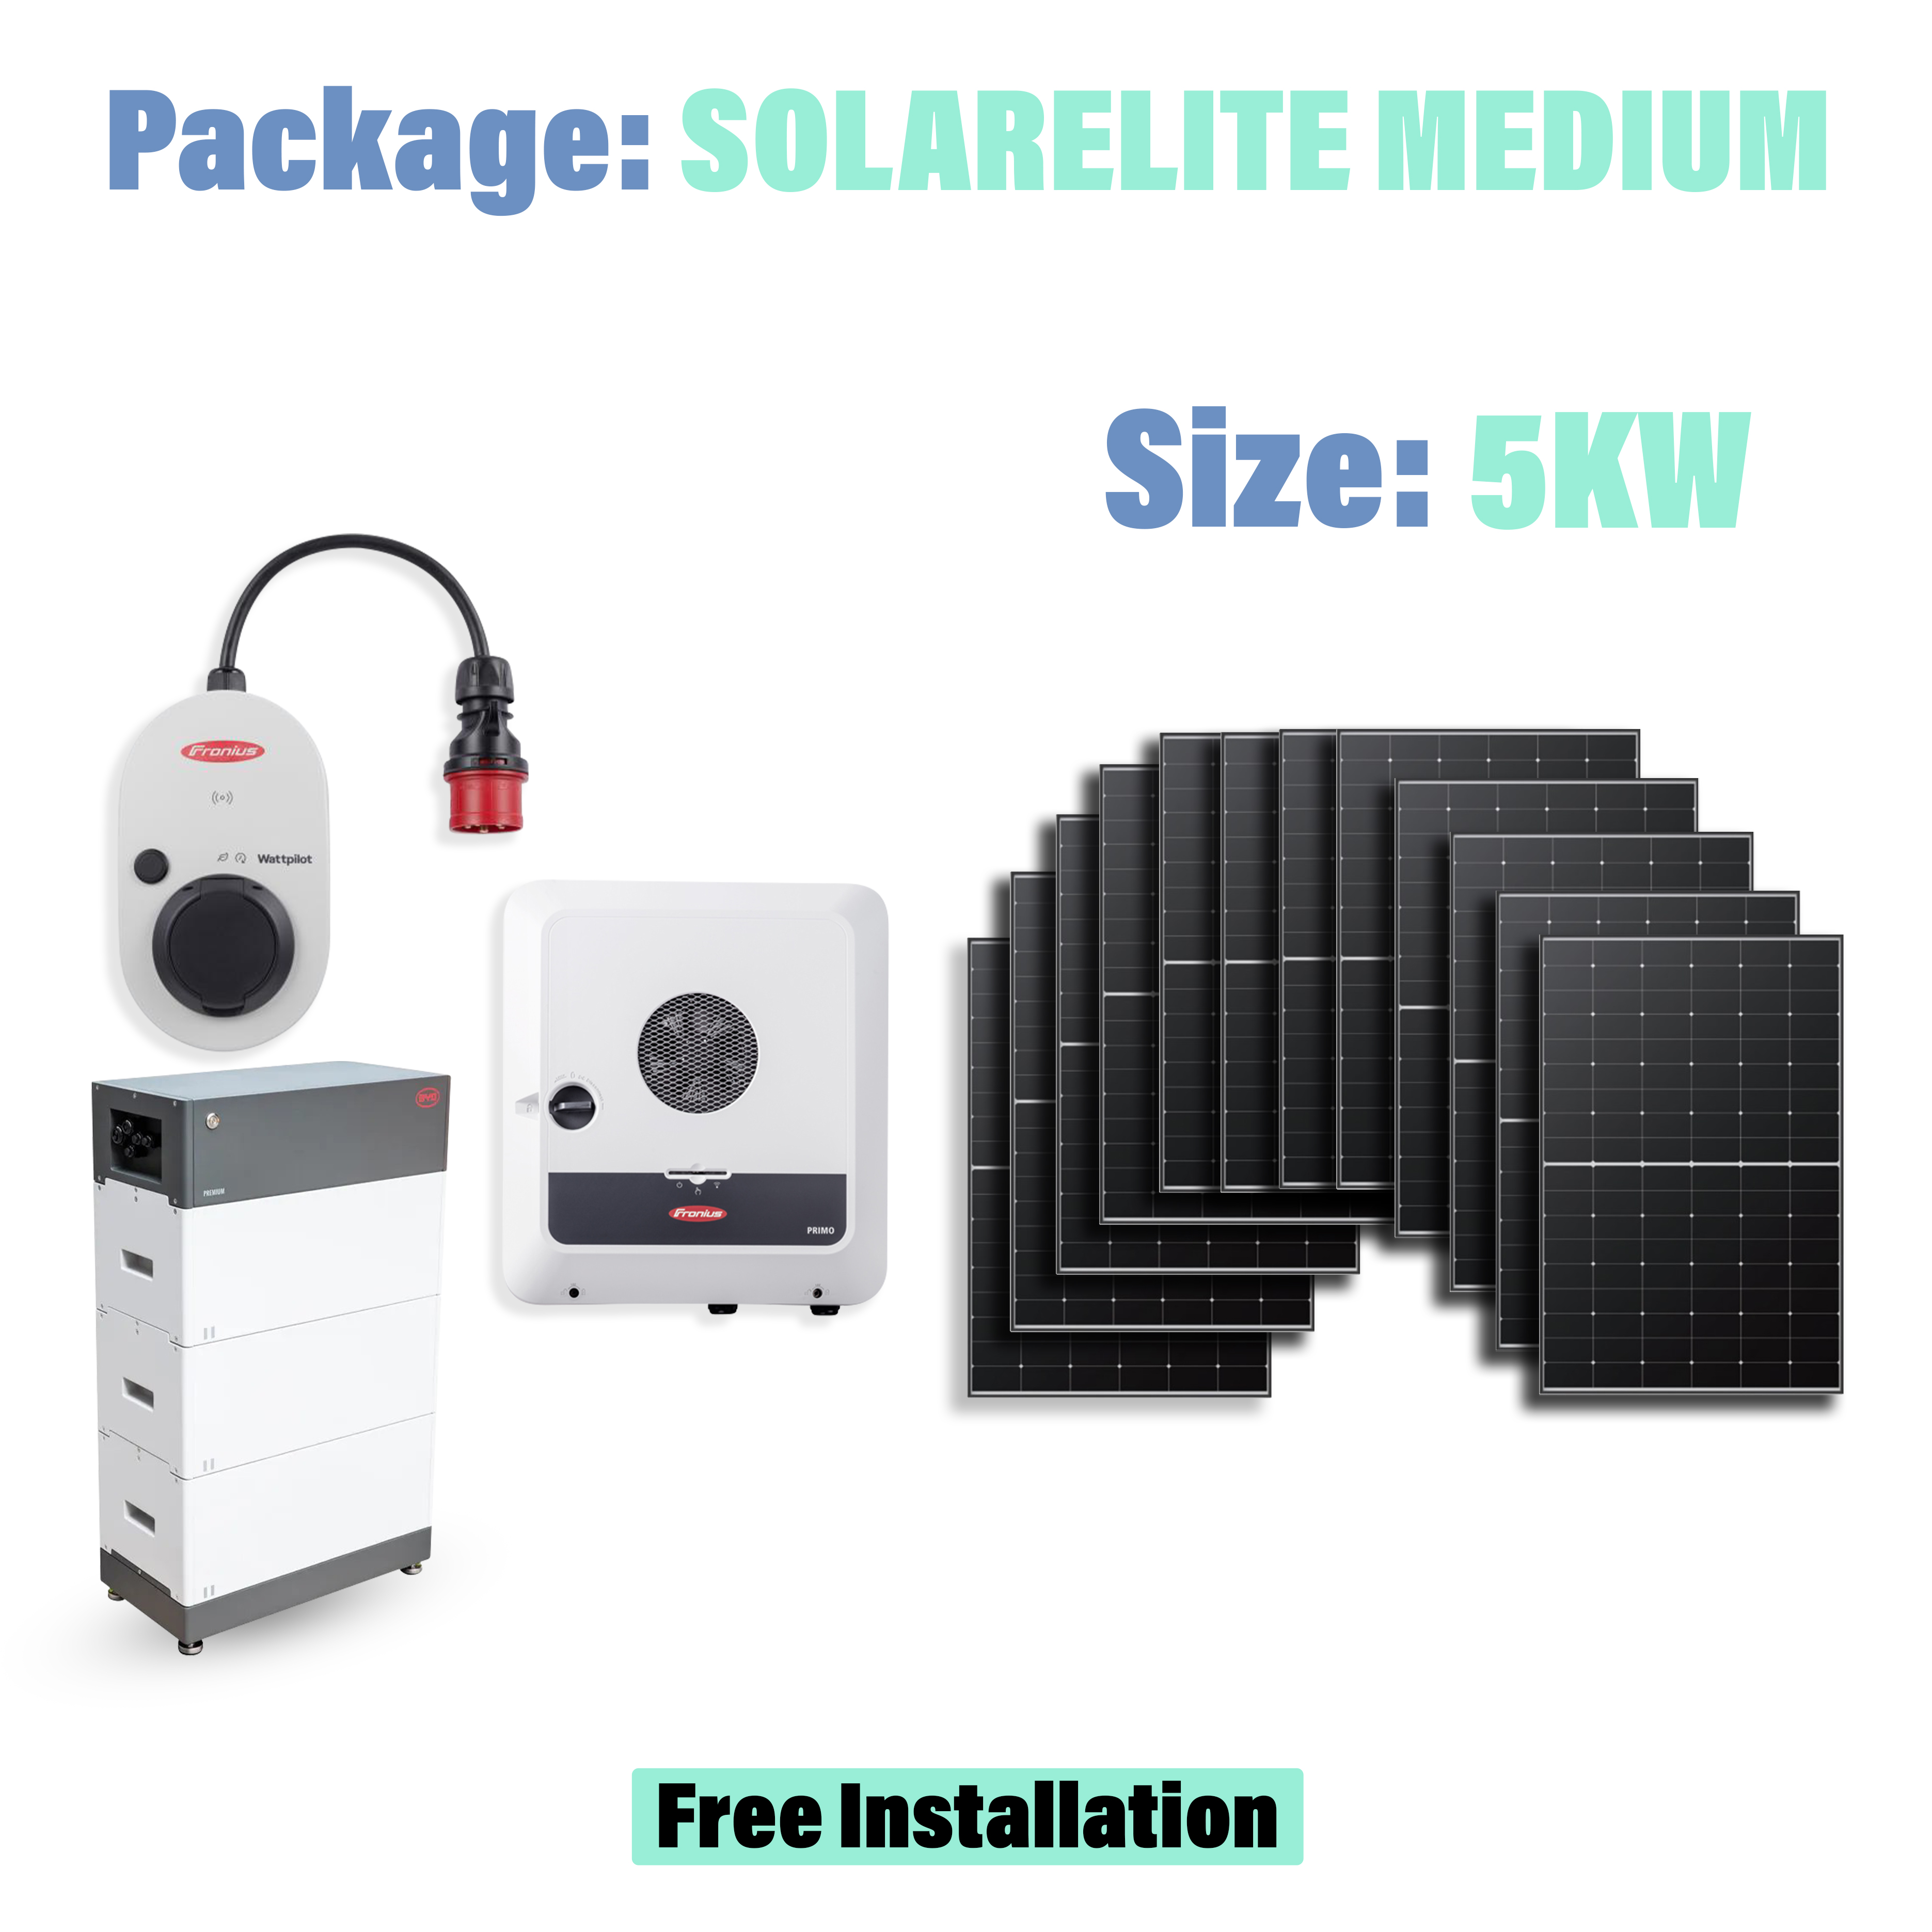 The SolarElite 5kwh Package